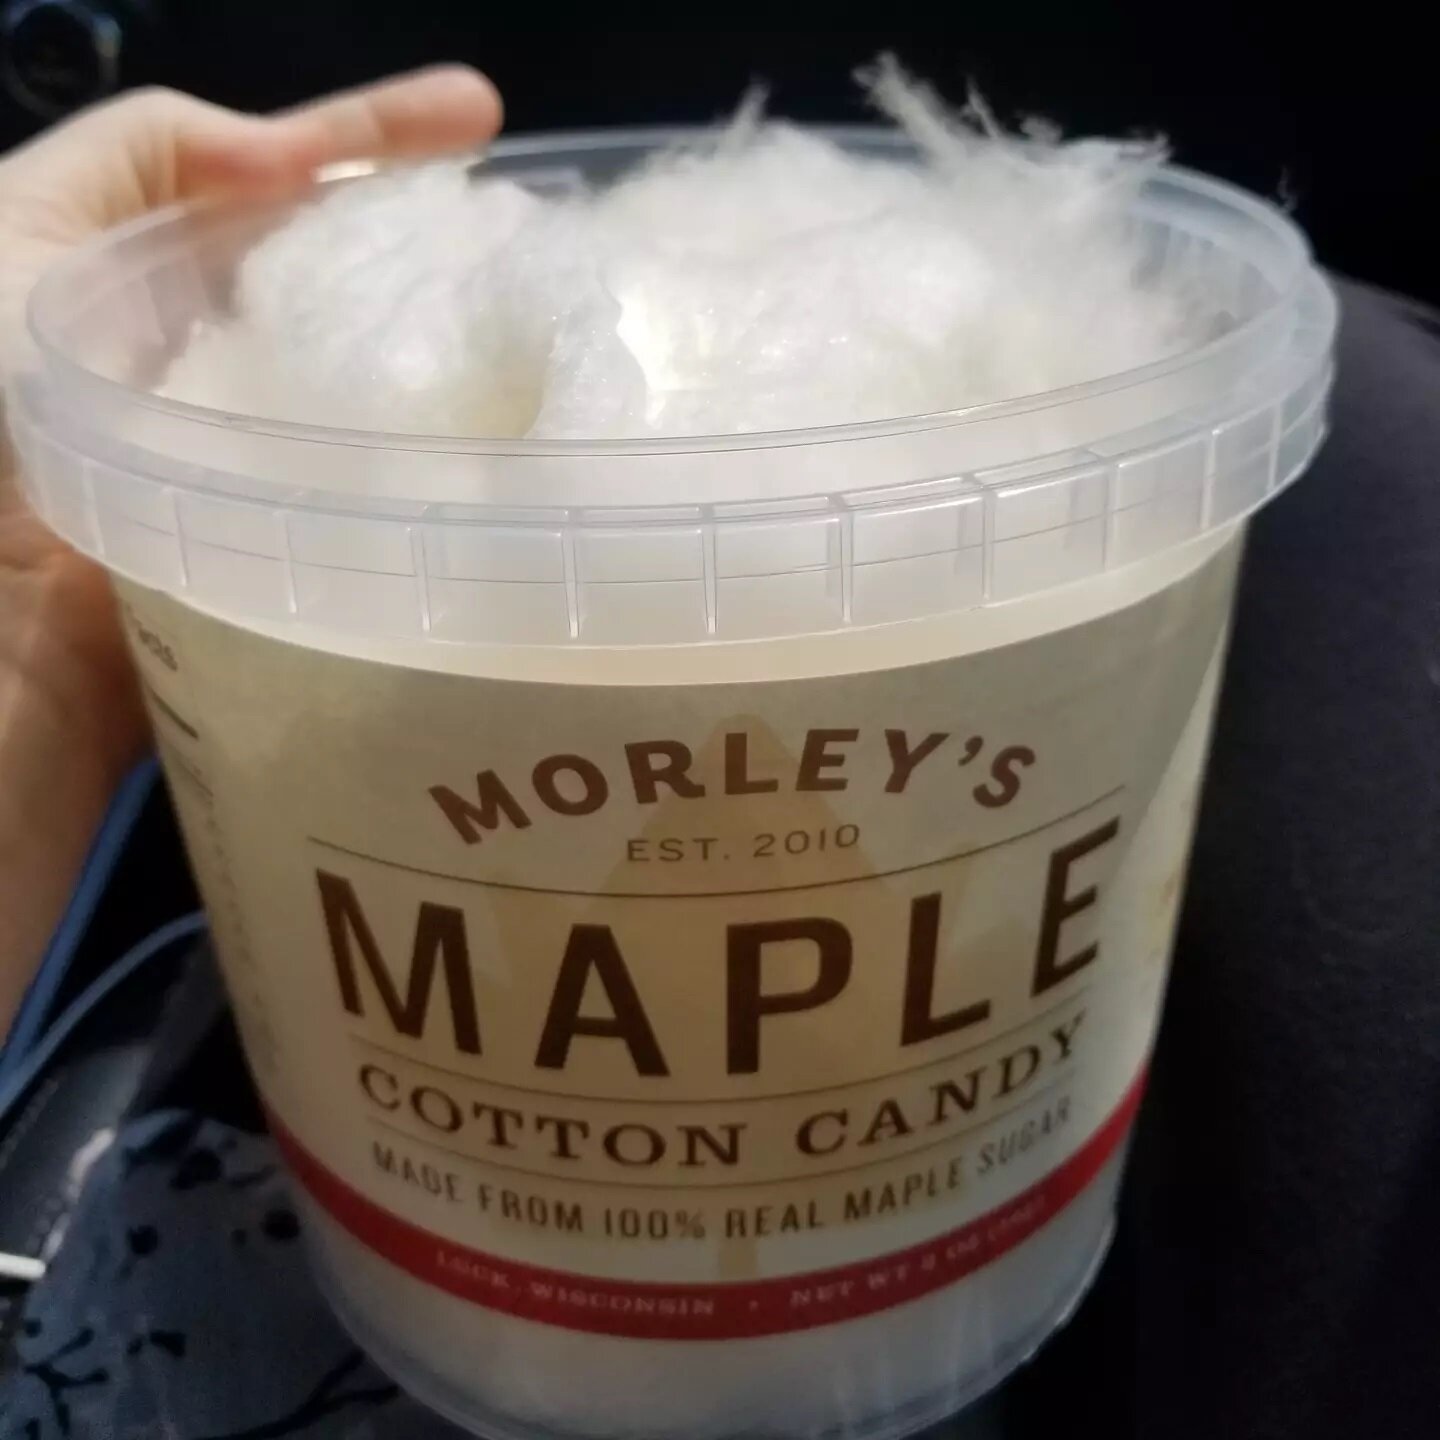 Oh my goodness, yum! If you've never had maple cotton candy... thank you for hosting a lovely chamber meeting this morning.